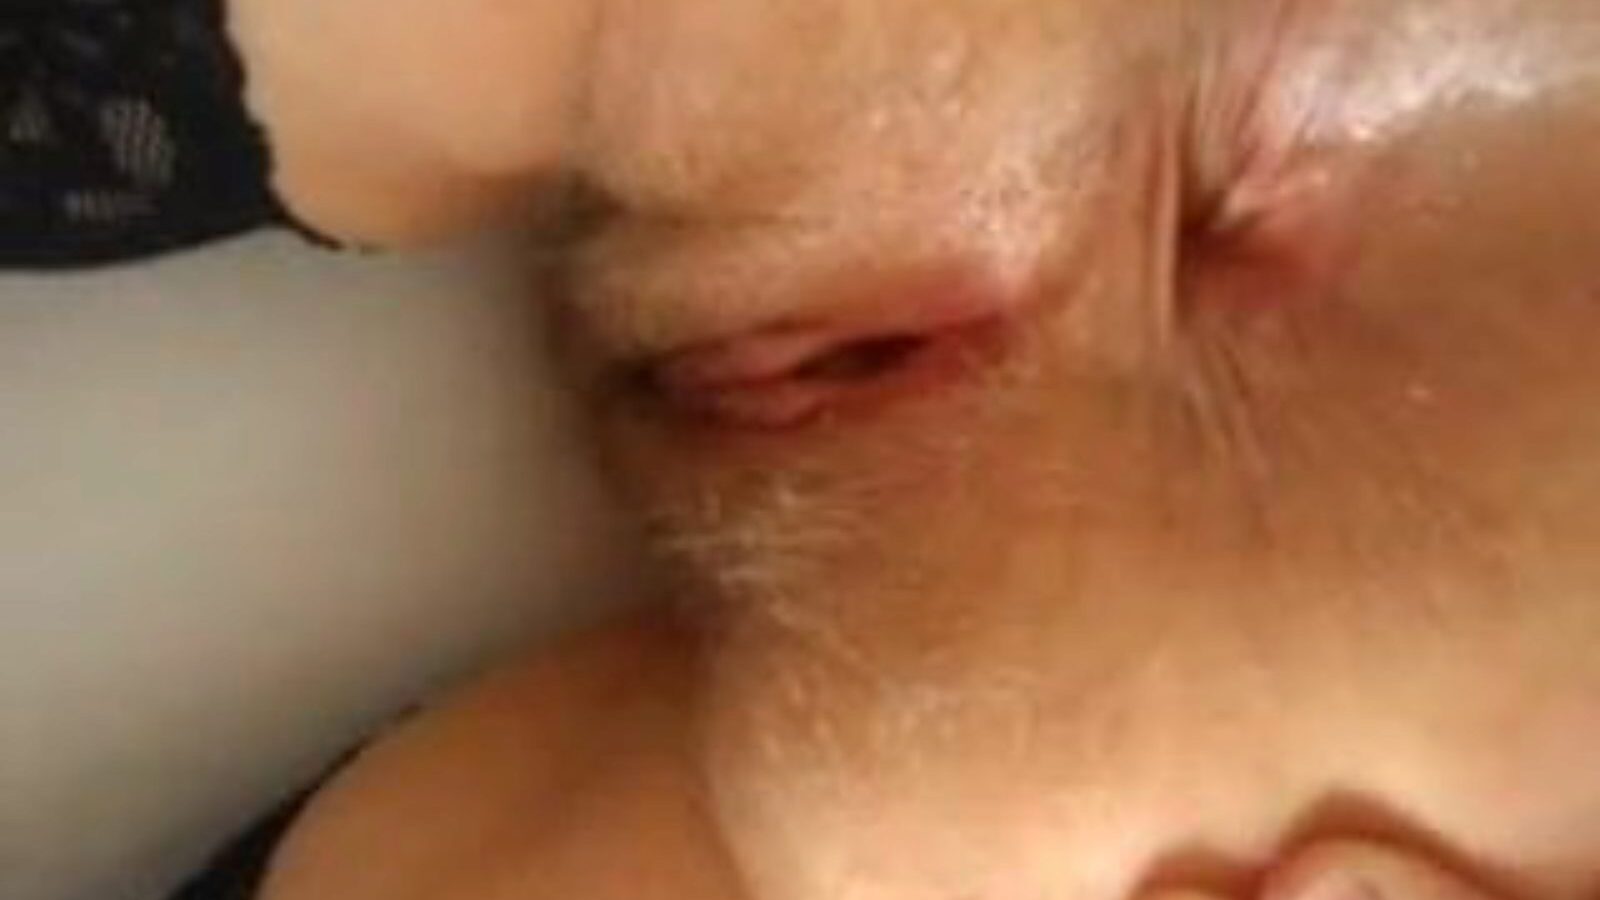 spread ass: spread open & mobile ass porn video - xhamster watch spread ass tube bang-out film scene free on xhamster, with the stounding bevy of spread open mobile ass & open asshole porno epizody